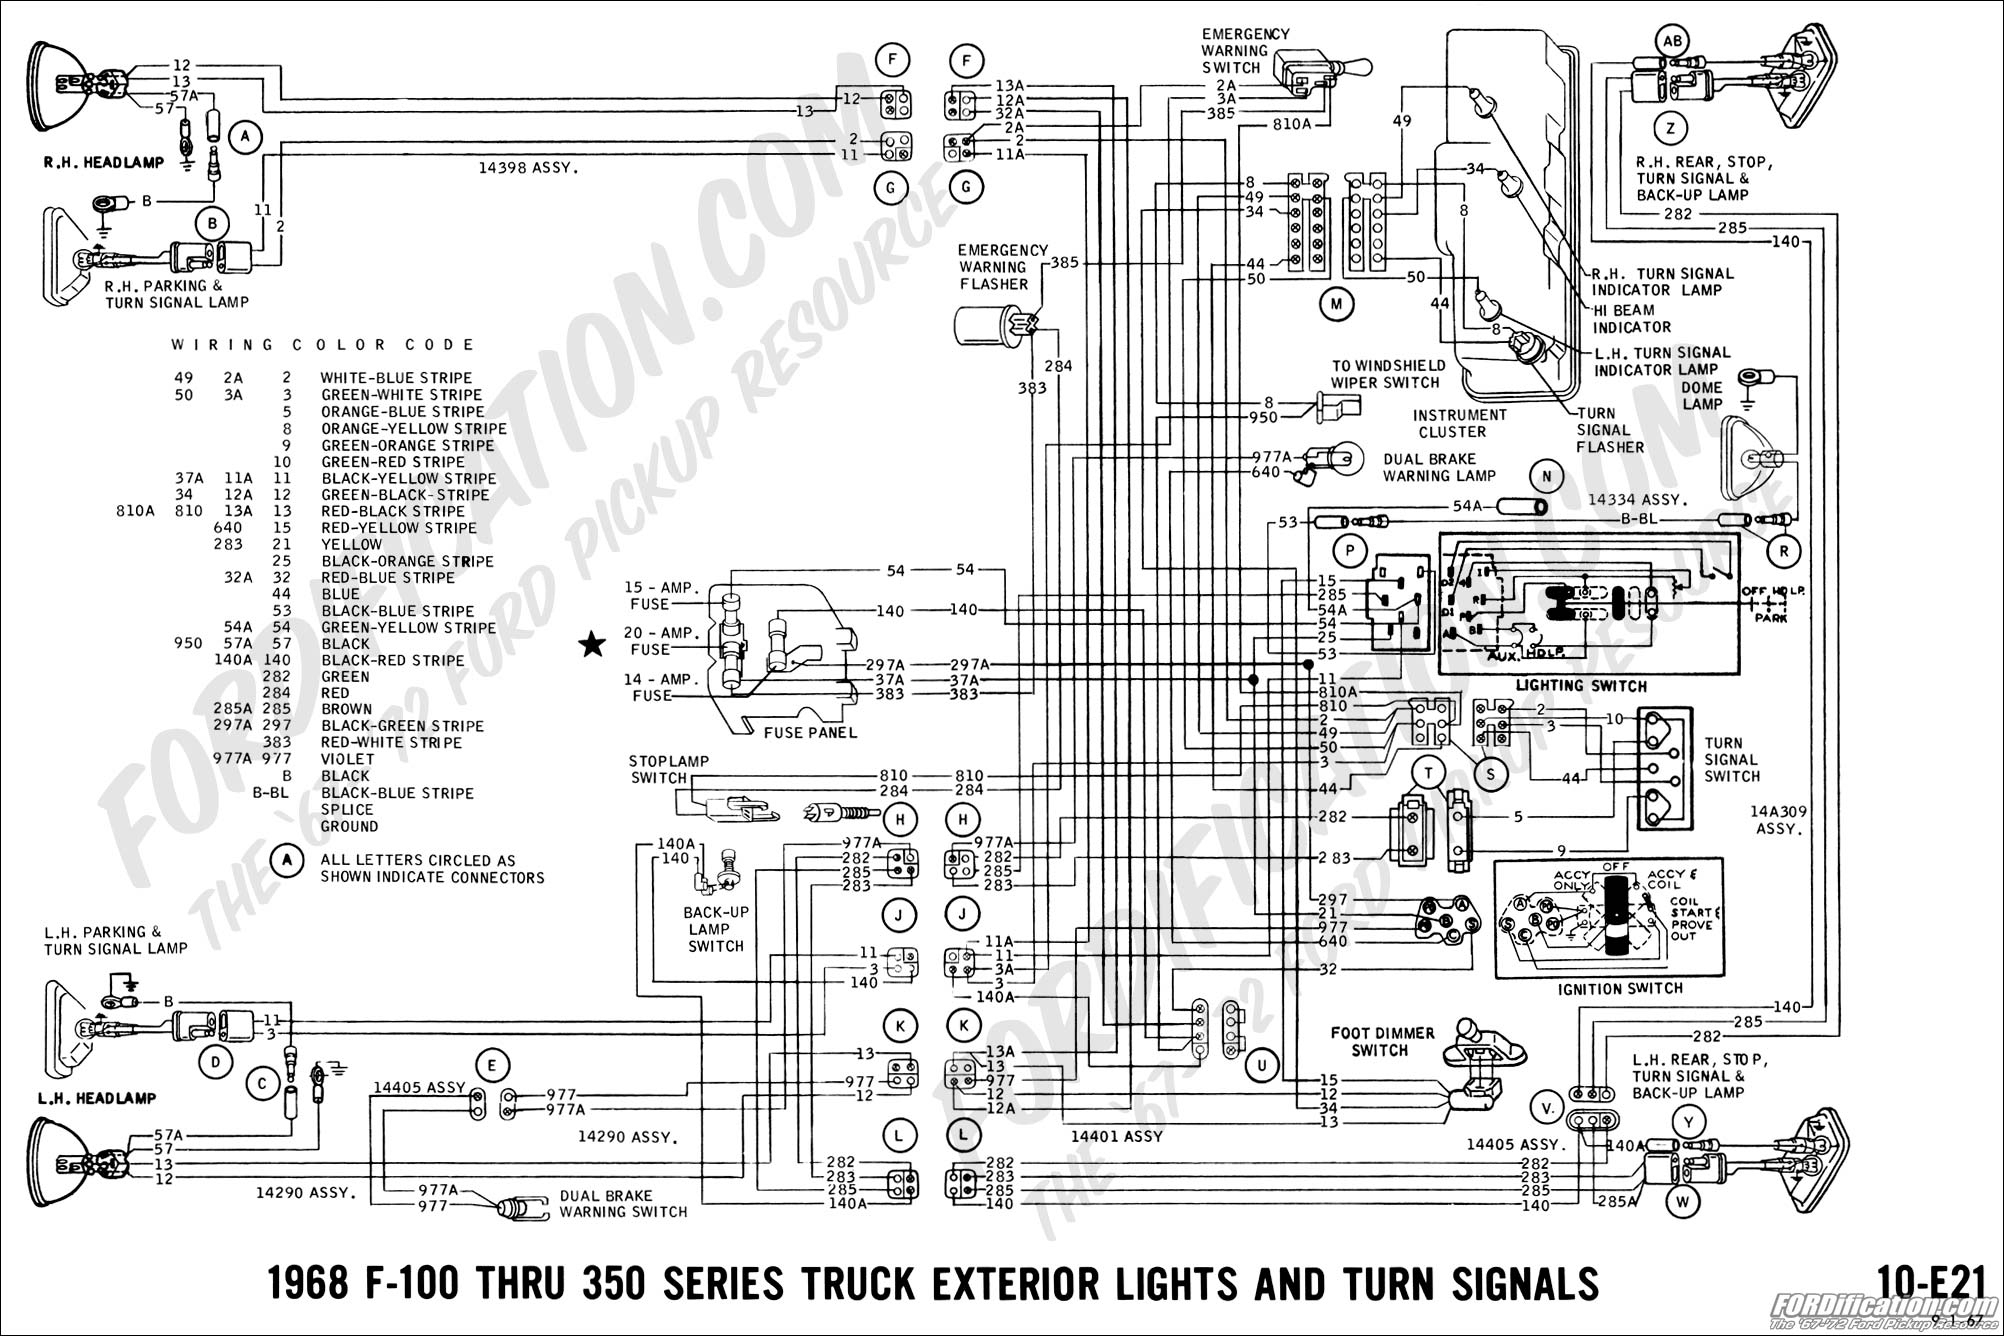 1968 Turn Signal/brake Issue - Ford Truck Enthusiasts Forums - Brake Light Turn Signal Wiring Diagram